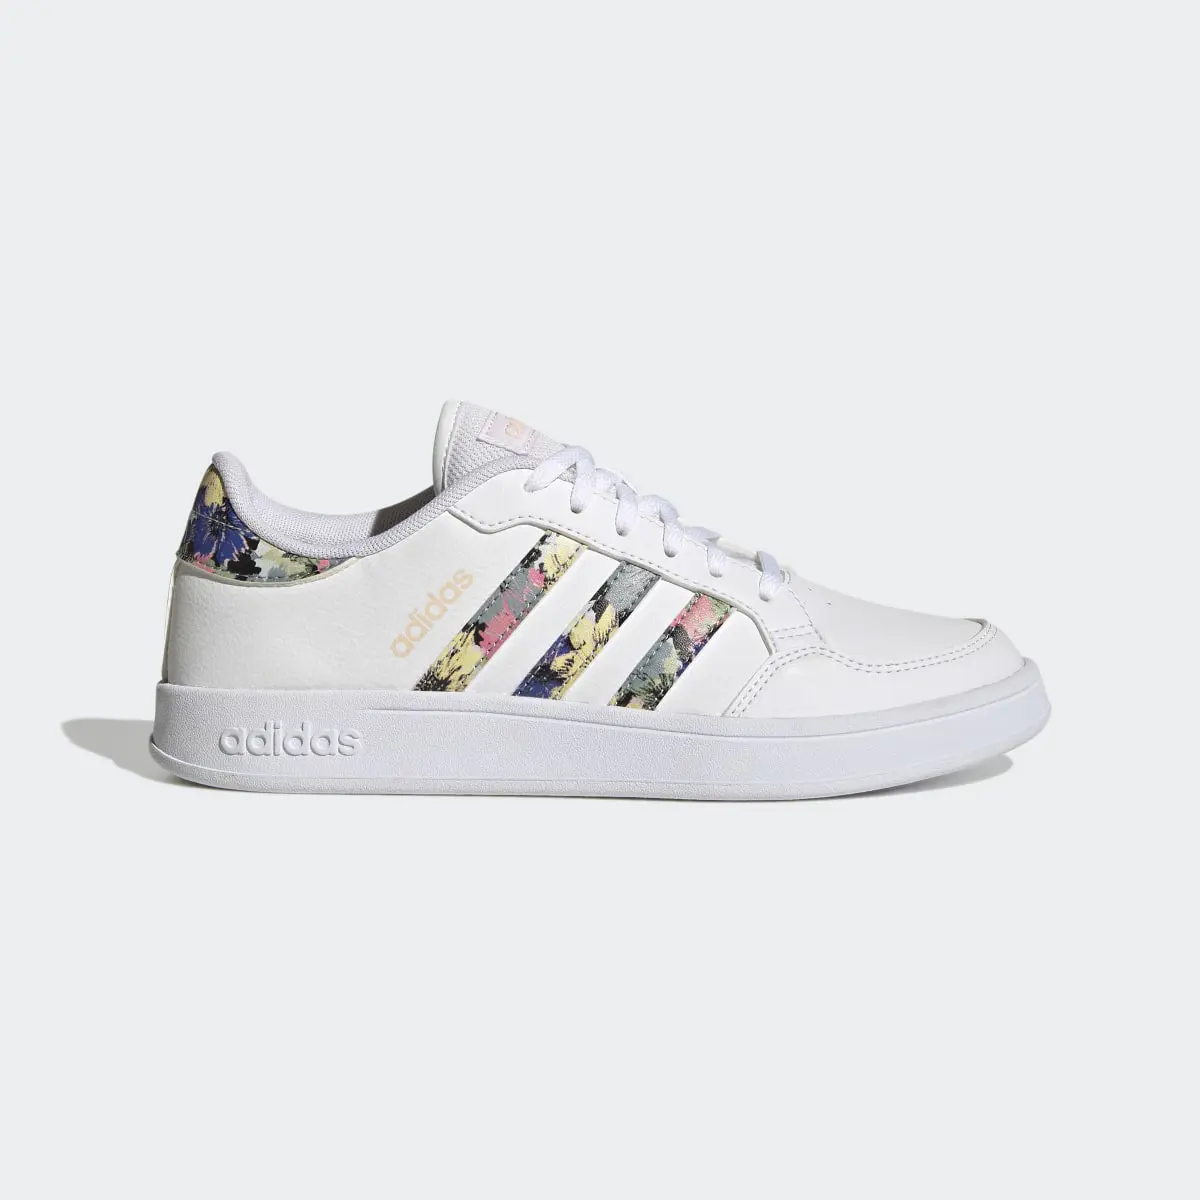 Adidas Breaknet Court Lifestyle Shoes. 2